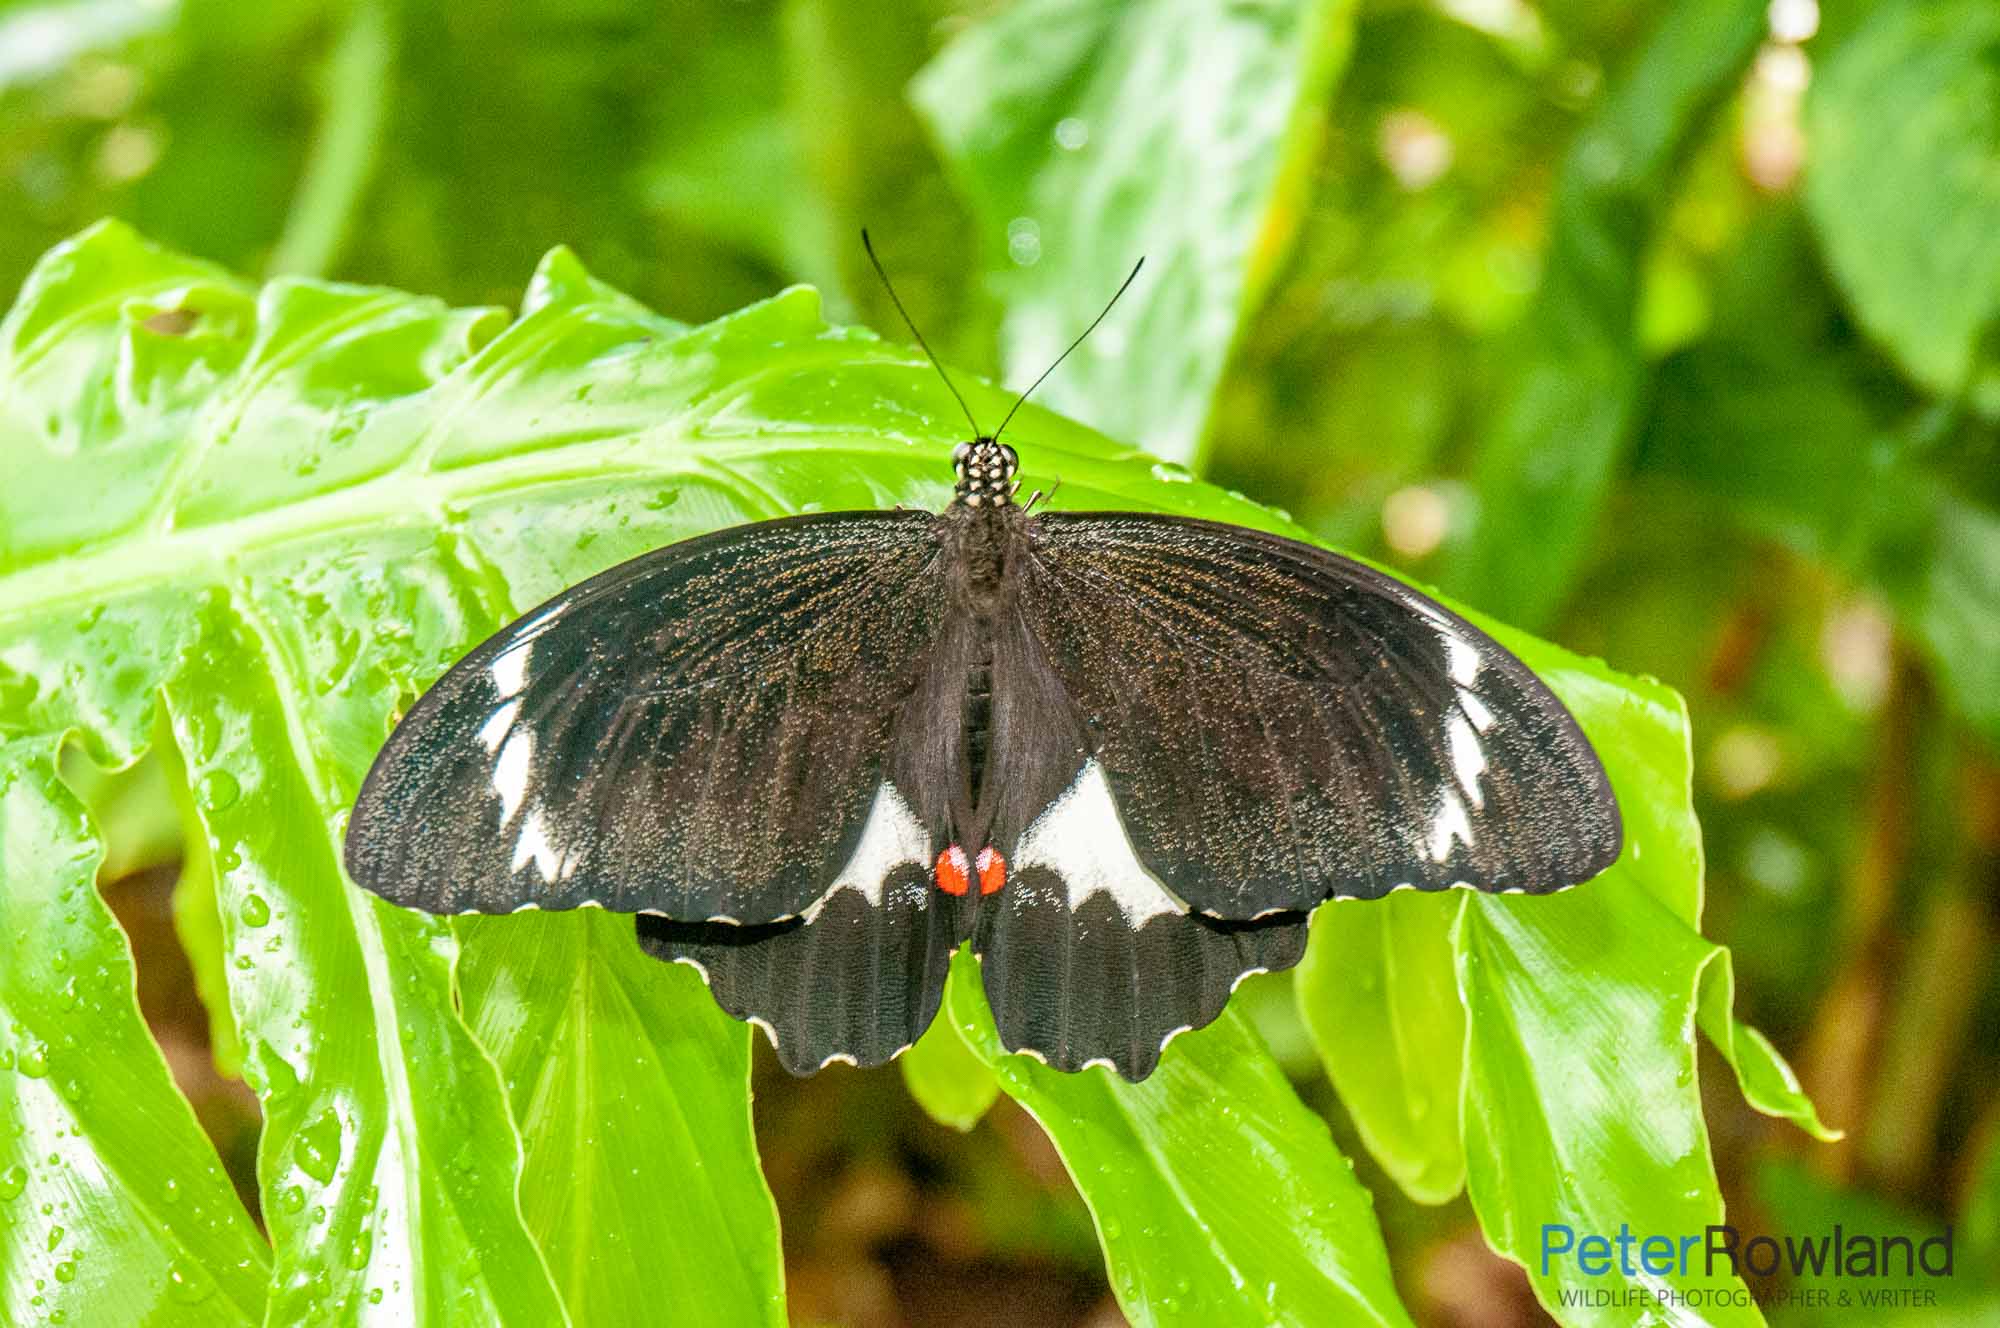 The upper wings of an Orchard Swallowtail sat on a leaf